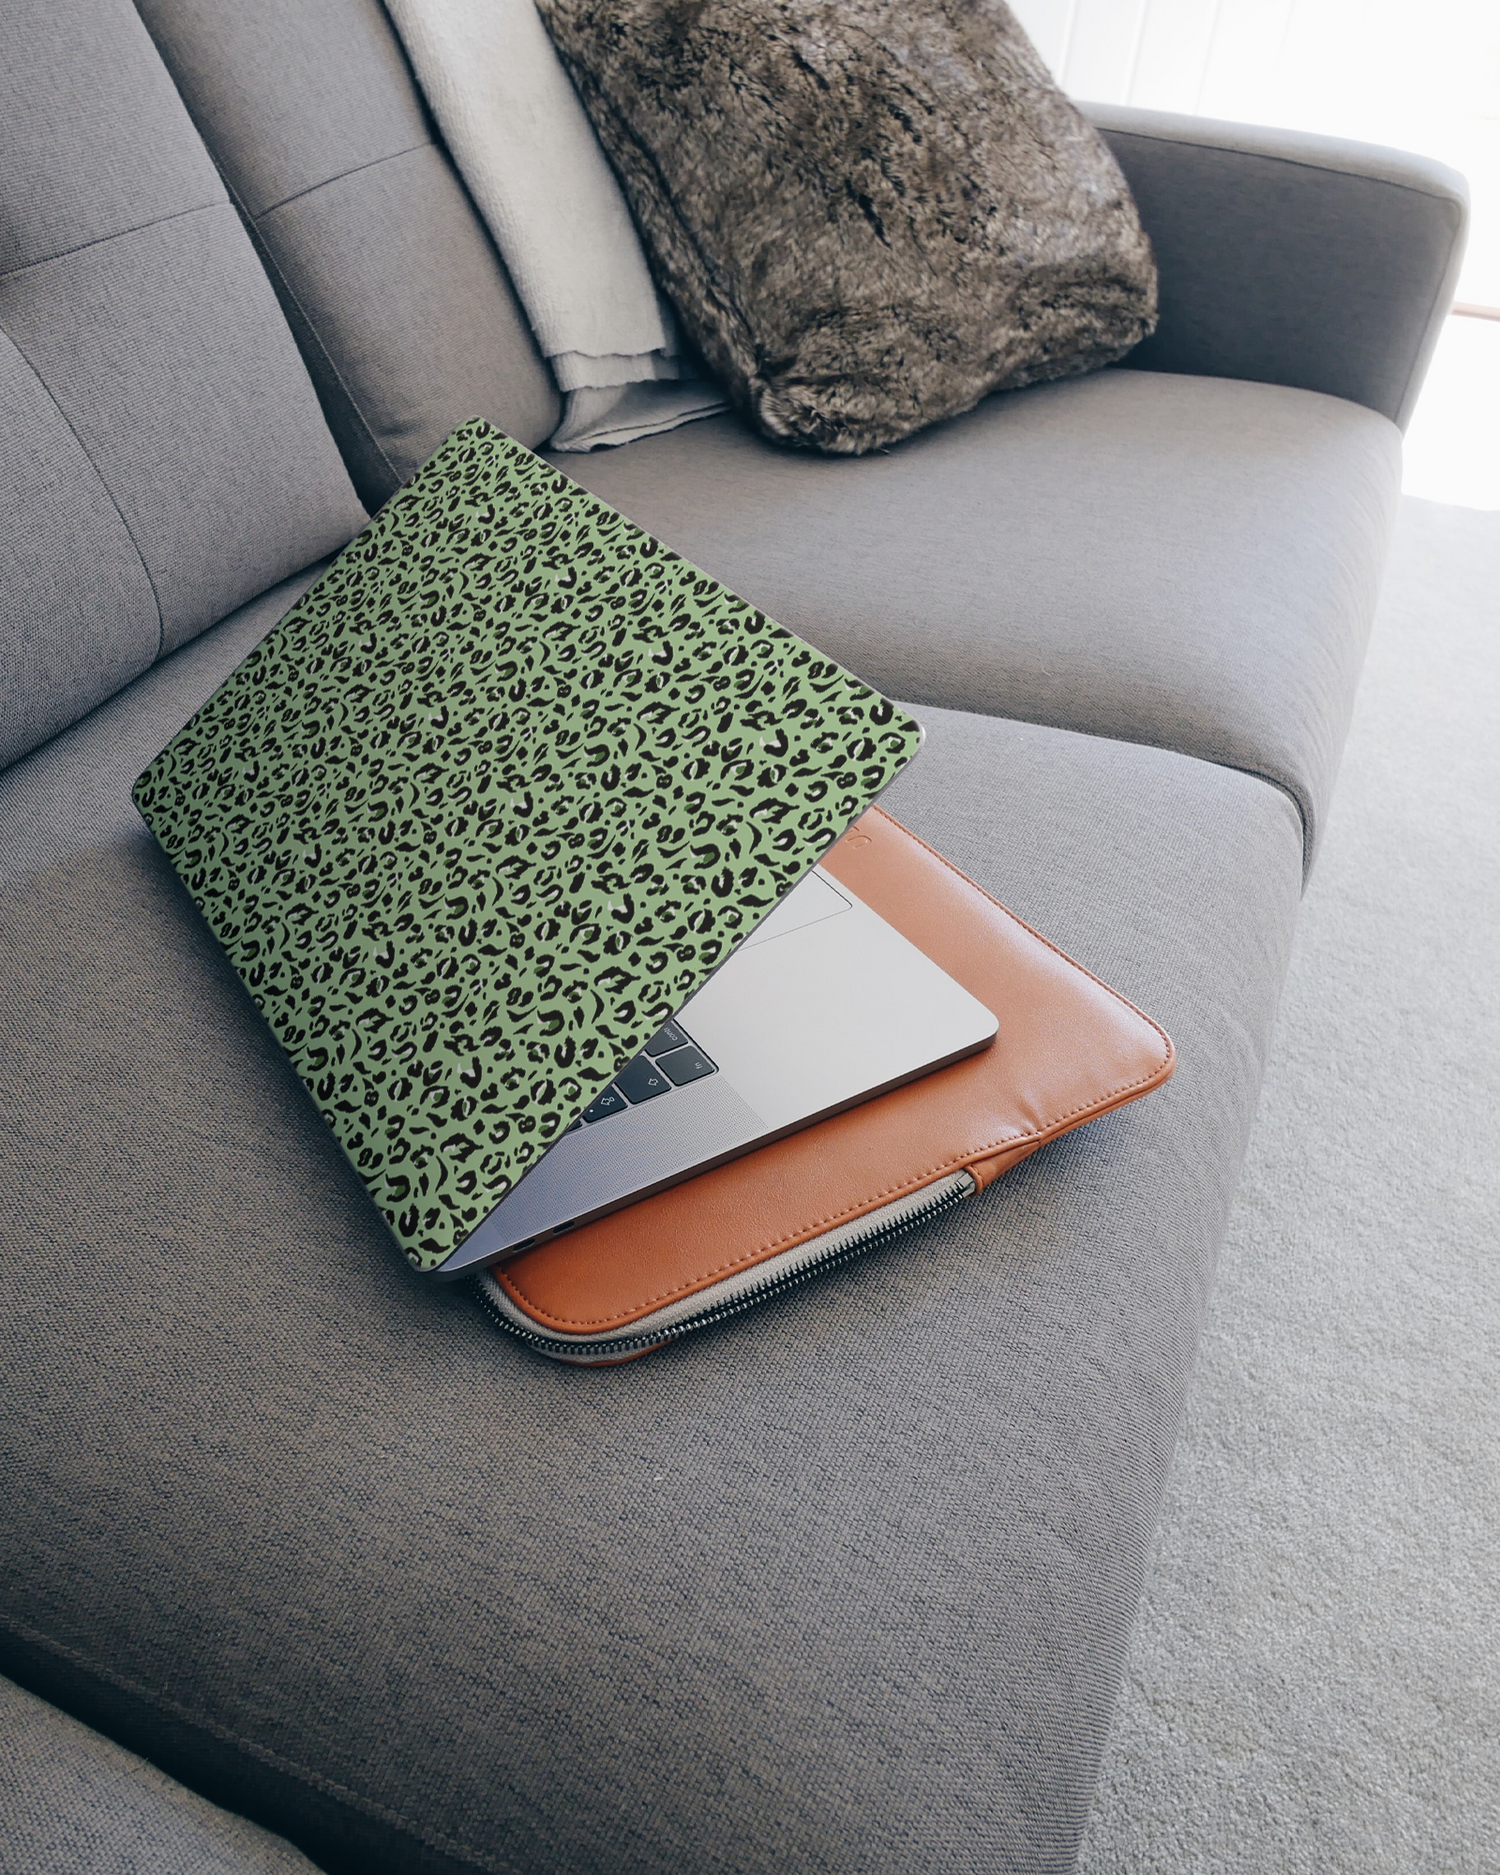 Mint Leopard Laptop Skin for 15 inch Apple MacBooks on a couch